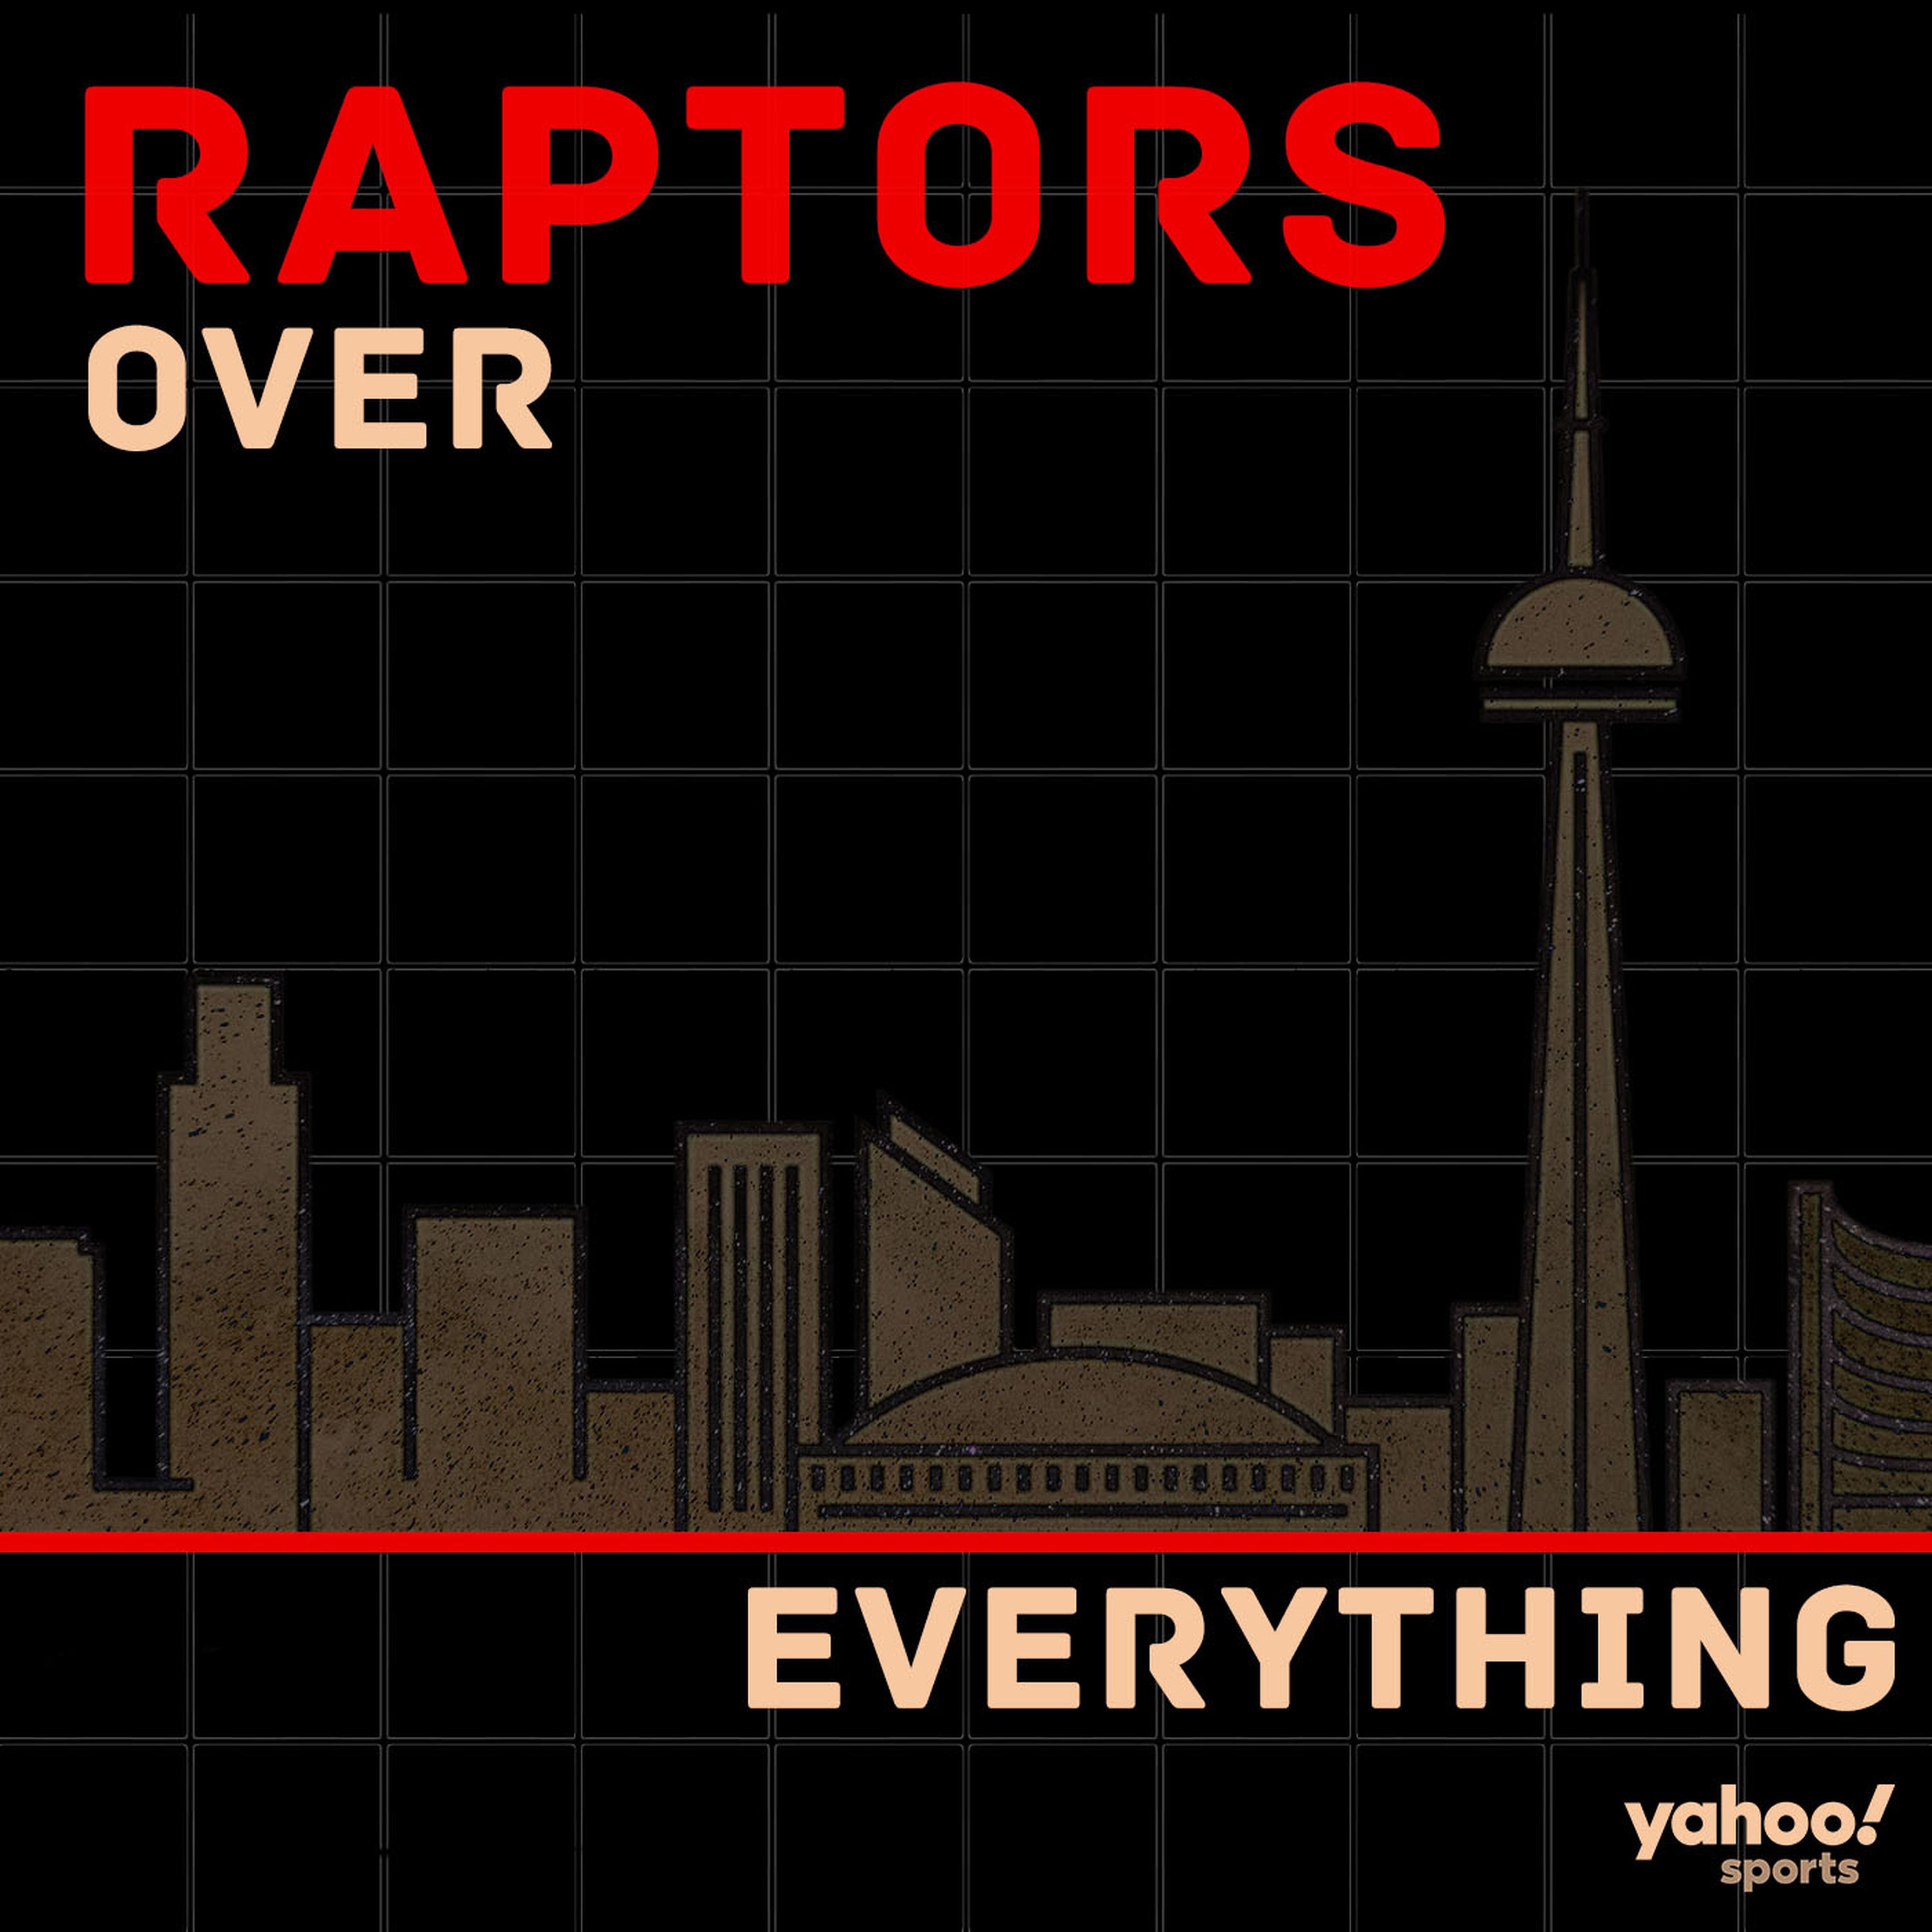 Twitter mailbag: Can and should the Raptors land Victor Oladipo or James Harden?